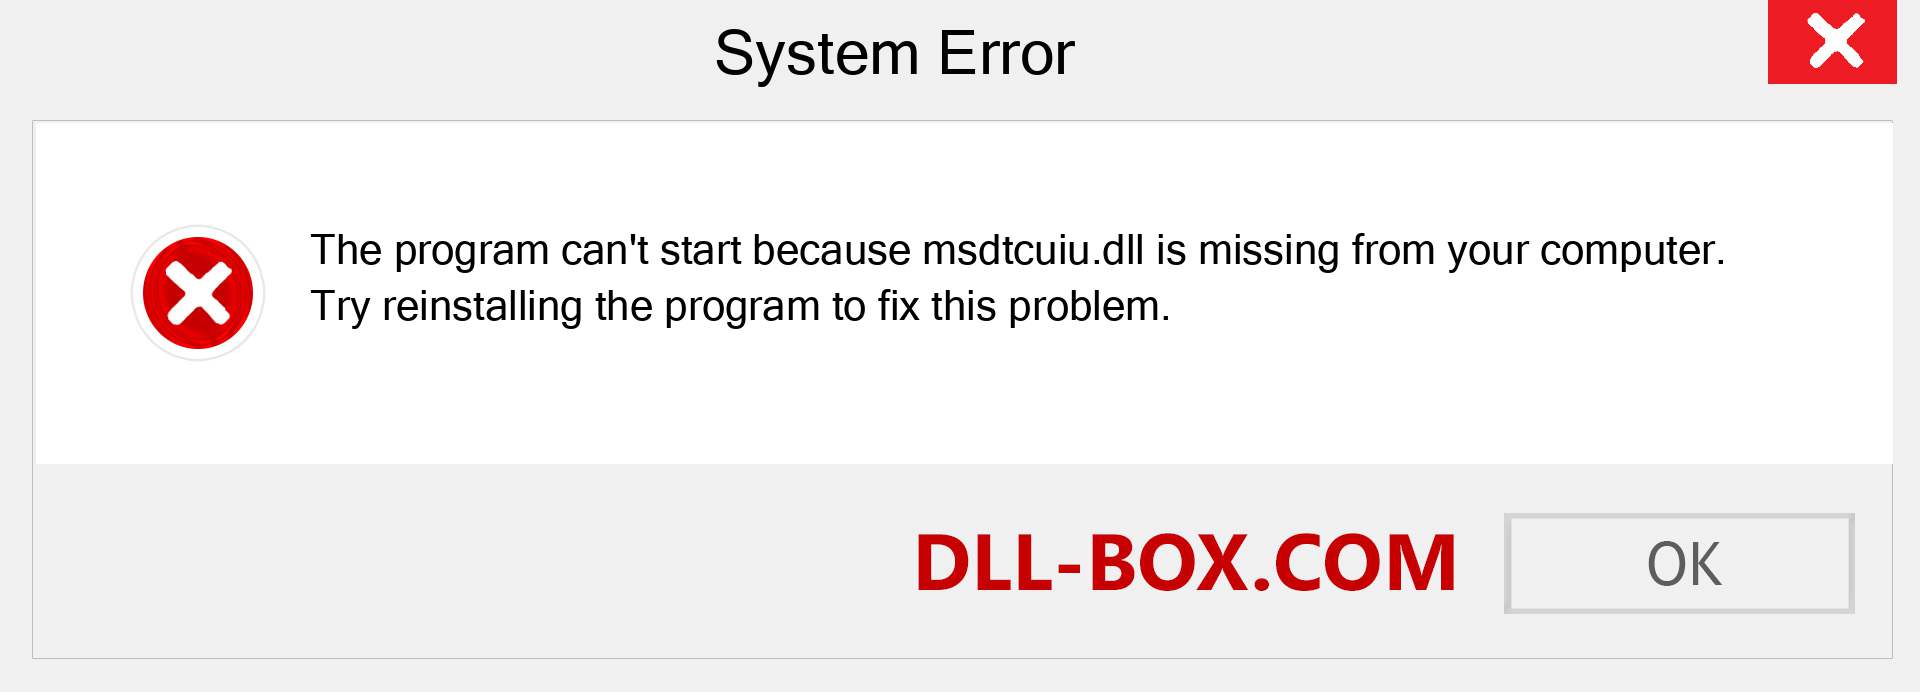  msdtcuiu.dll file is missing?. Download for Windows 7, 8, 10 - Fix  msdtcuiu dll Missing Error on Windows, photos, images